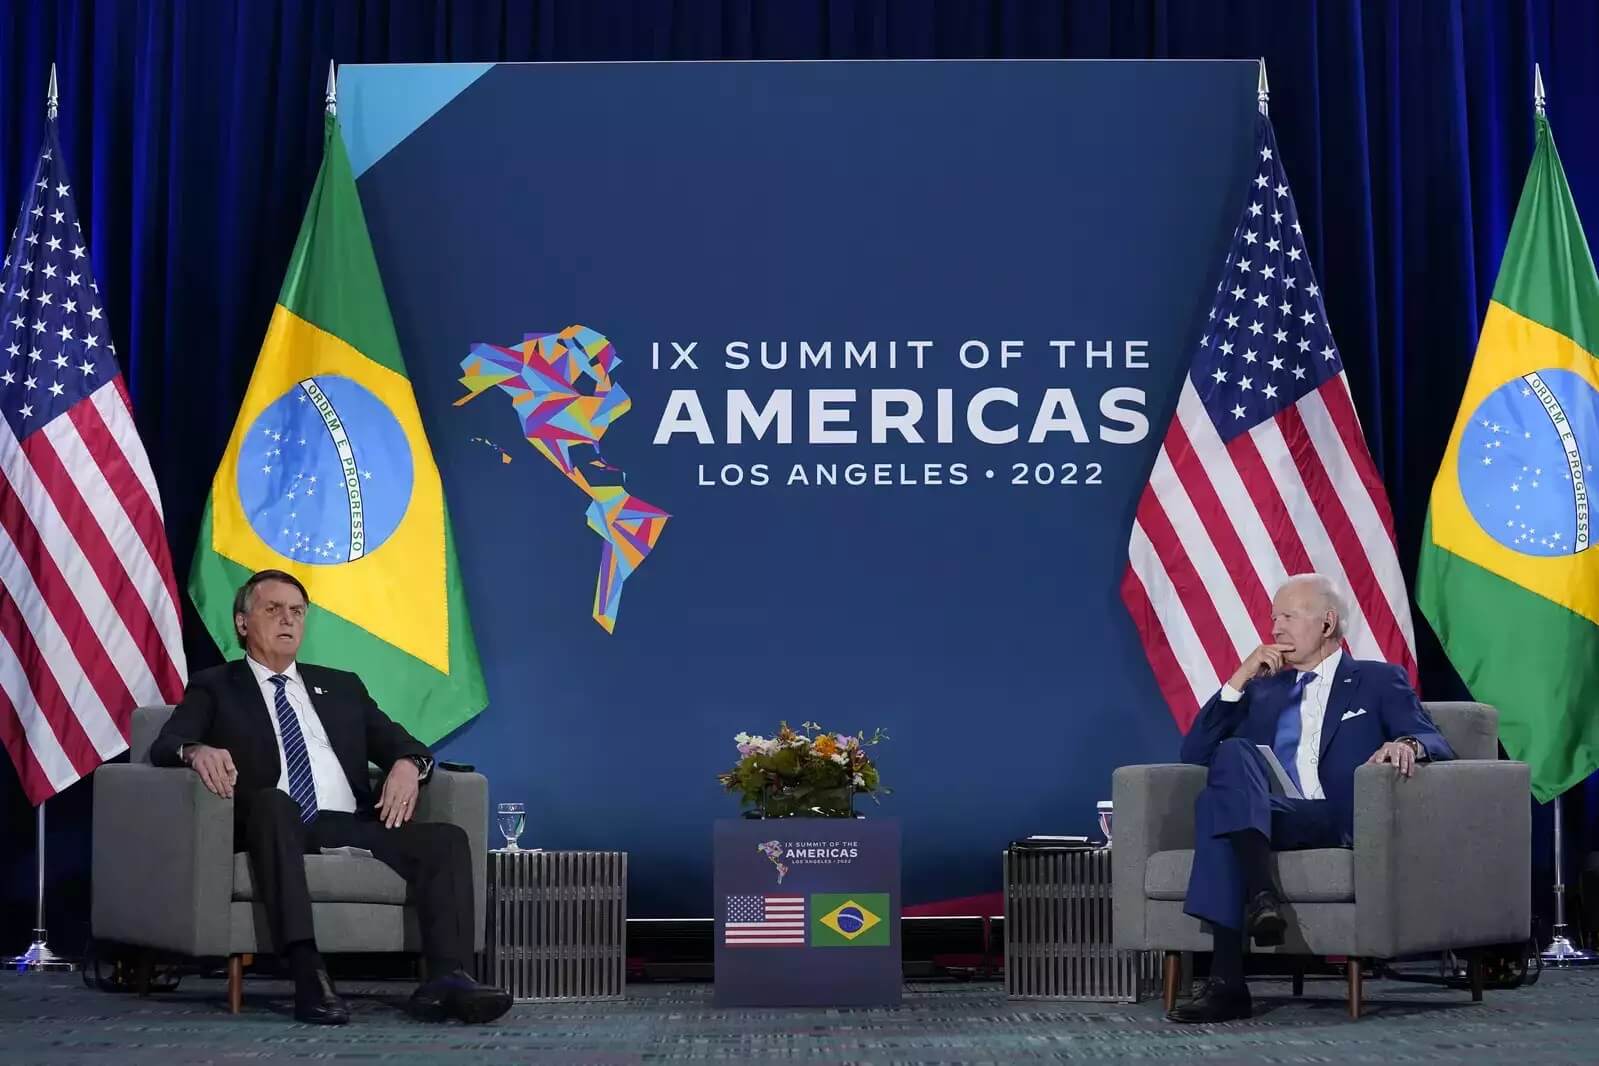 Bolsonaro Says US “Threatening” Brazil’s Sovereignty Over “Ideological Differences”